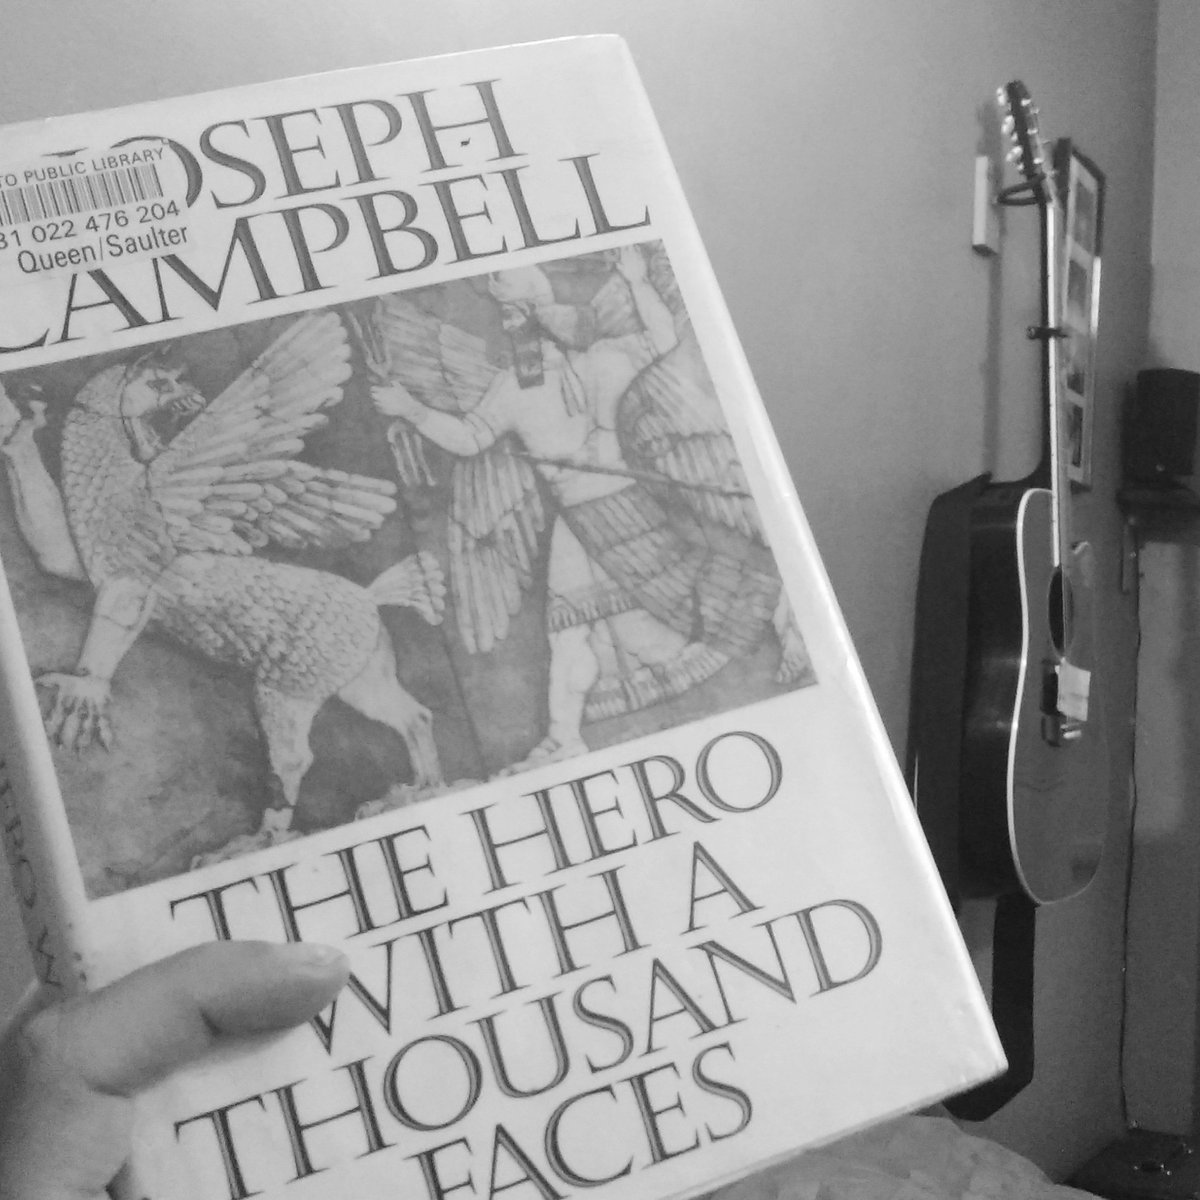 #Songwriting research. #TheHeroWithAThousandFaces by #JosephCampbell 
#HeroesJourney #Songs #Myth #StoryTelling #TakamineGuitars #AcousticGuitar #KlipschSurroundSound #Speakers #Toronto #PublicLibrary